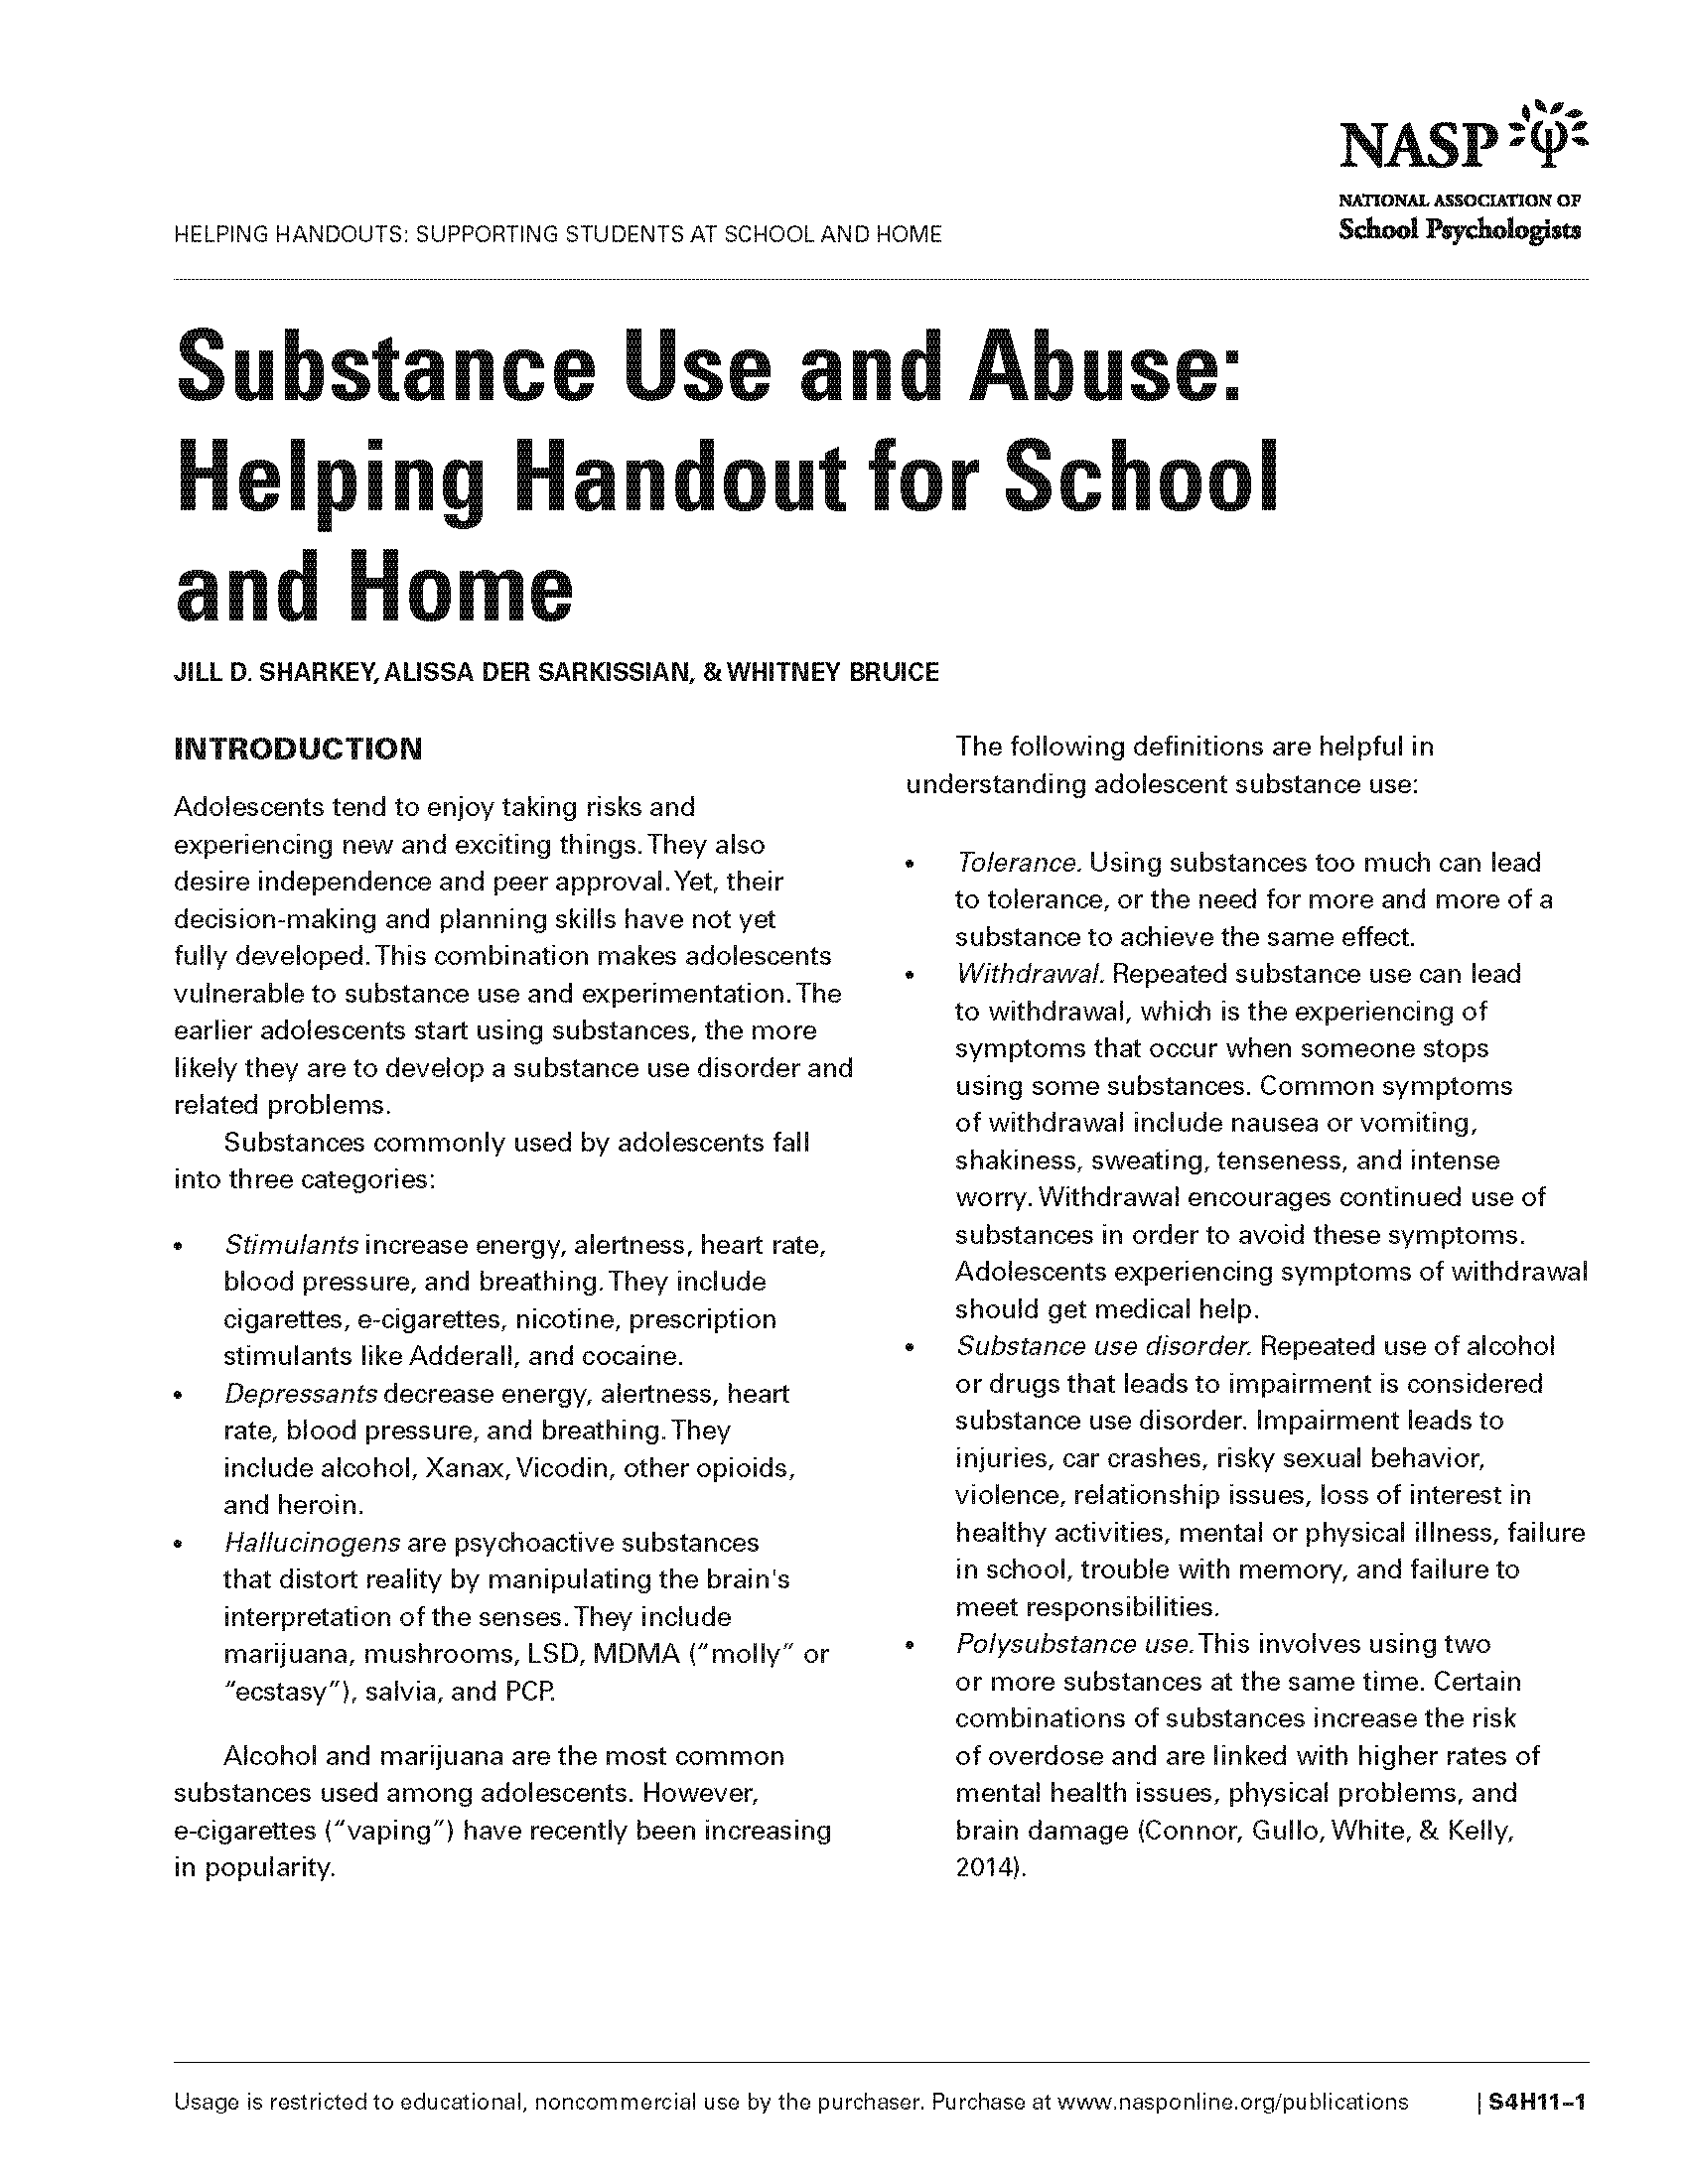 Substance Use and Abuse: Helping Handout for School and Home